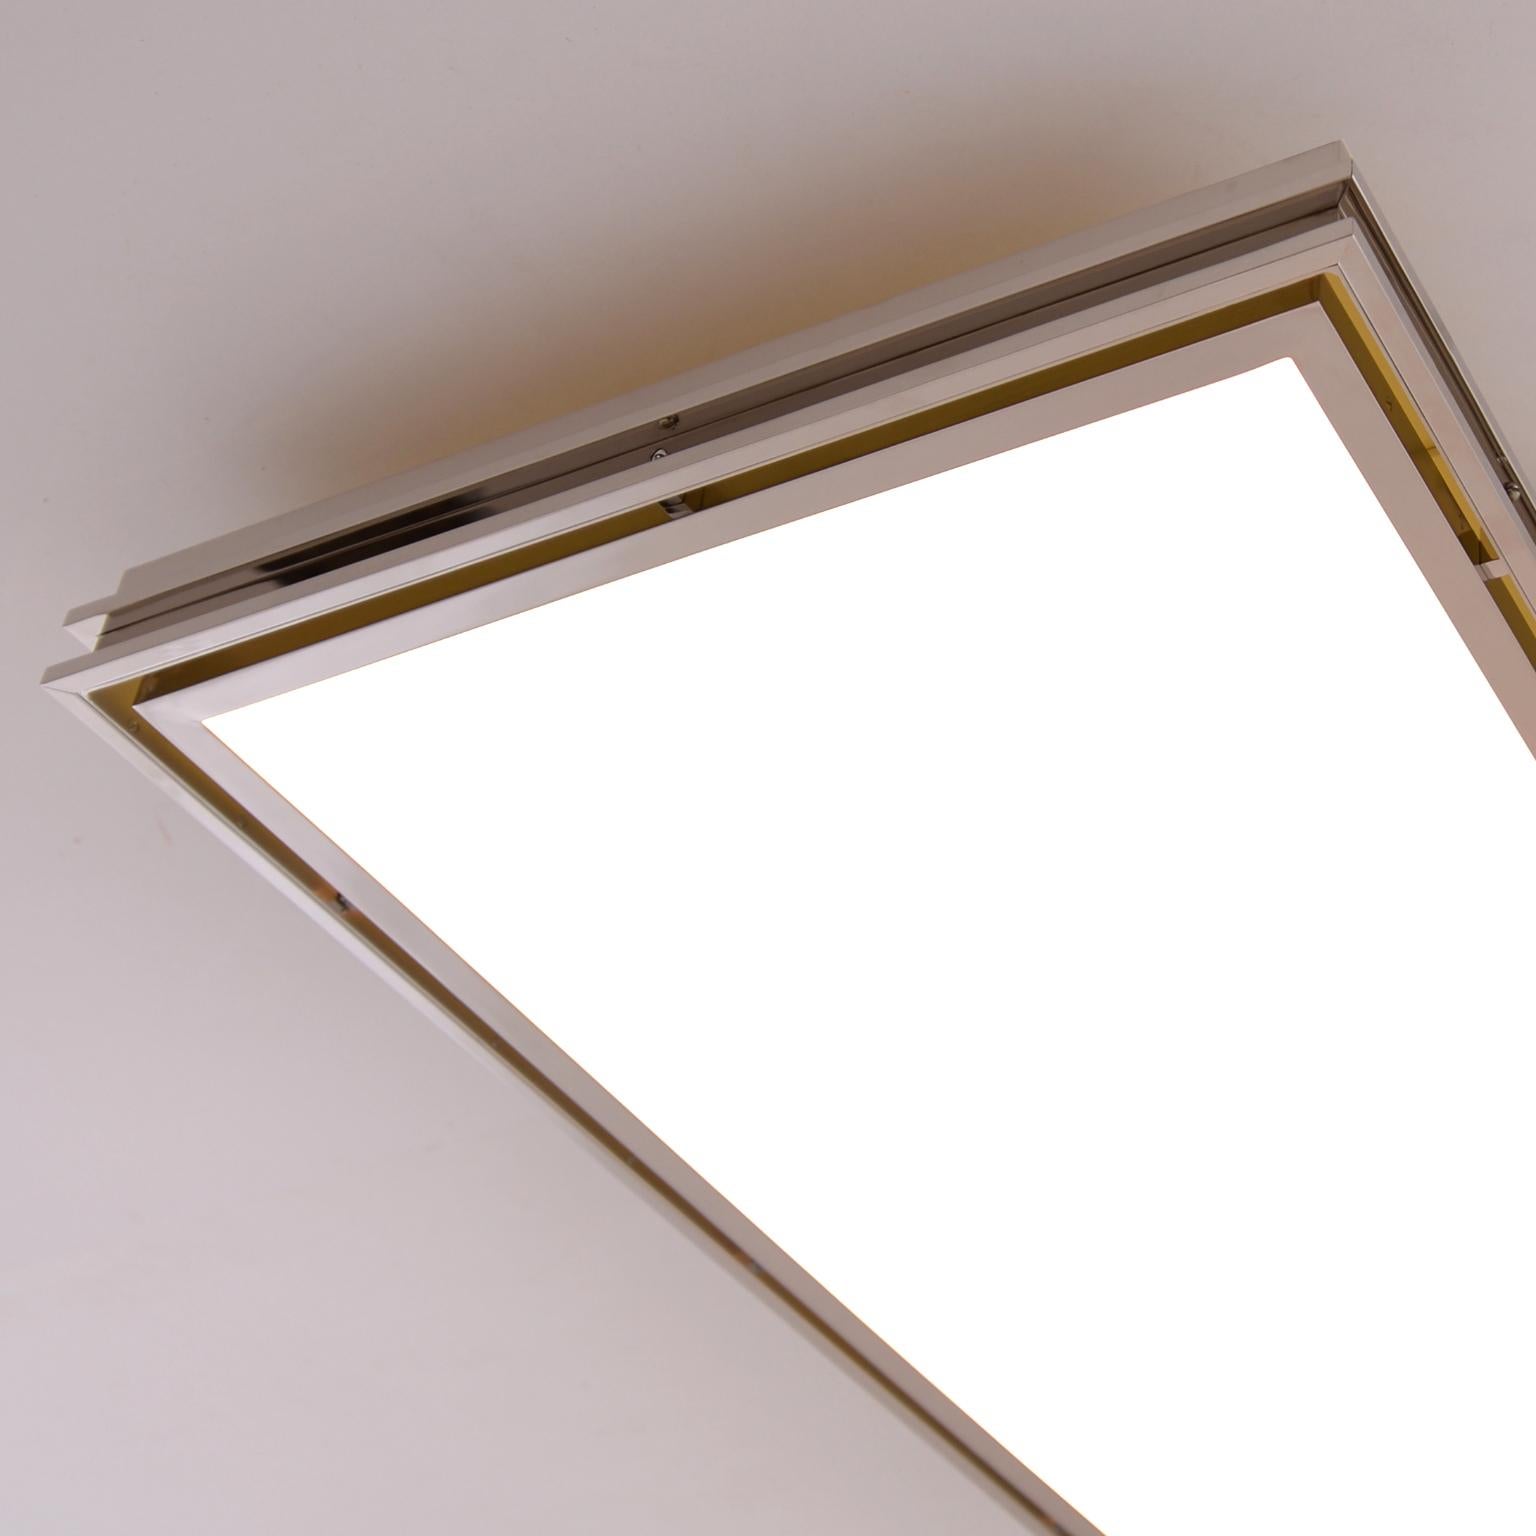 Etched Modern Rectangular, Chrome-Plated Ceiling Light, LED Panel by GMD Berlin, 2018 For Sale